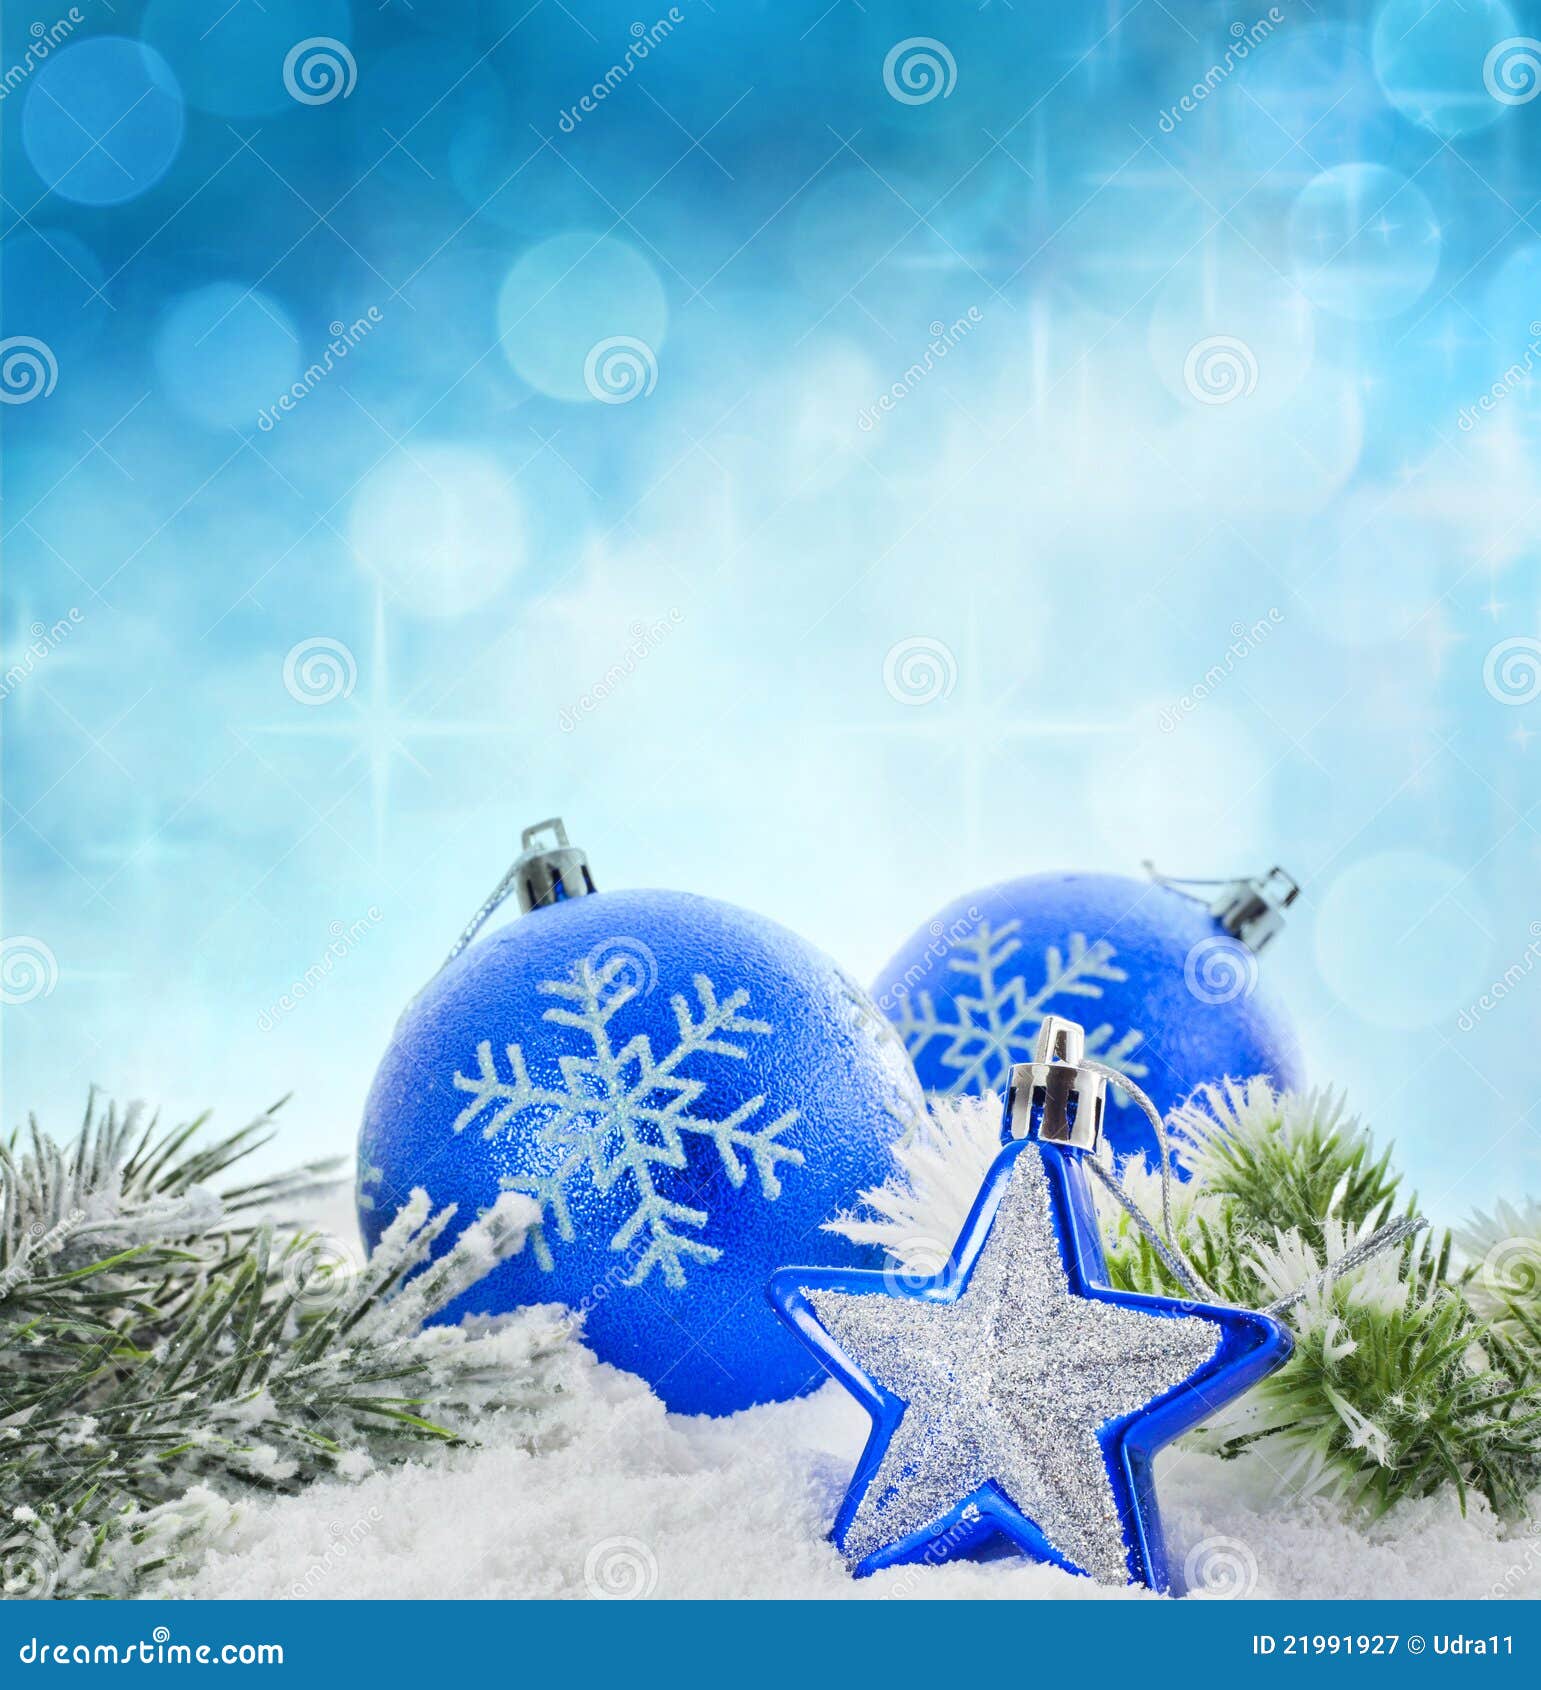 Christmas Winter Blue Baubles Card Stock Image - Image of composition ...